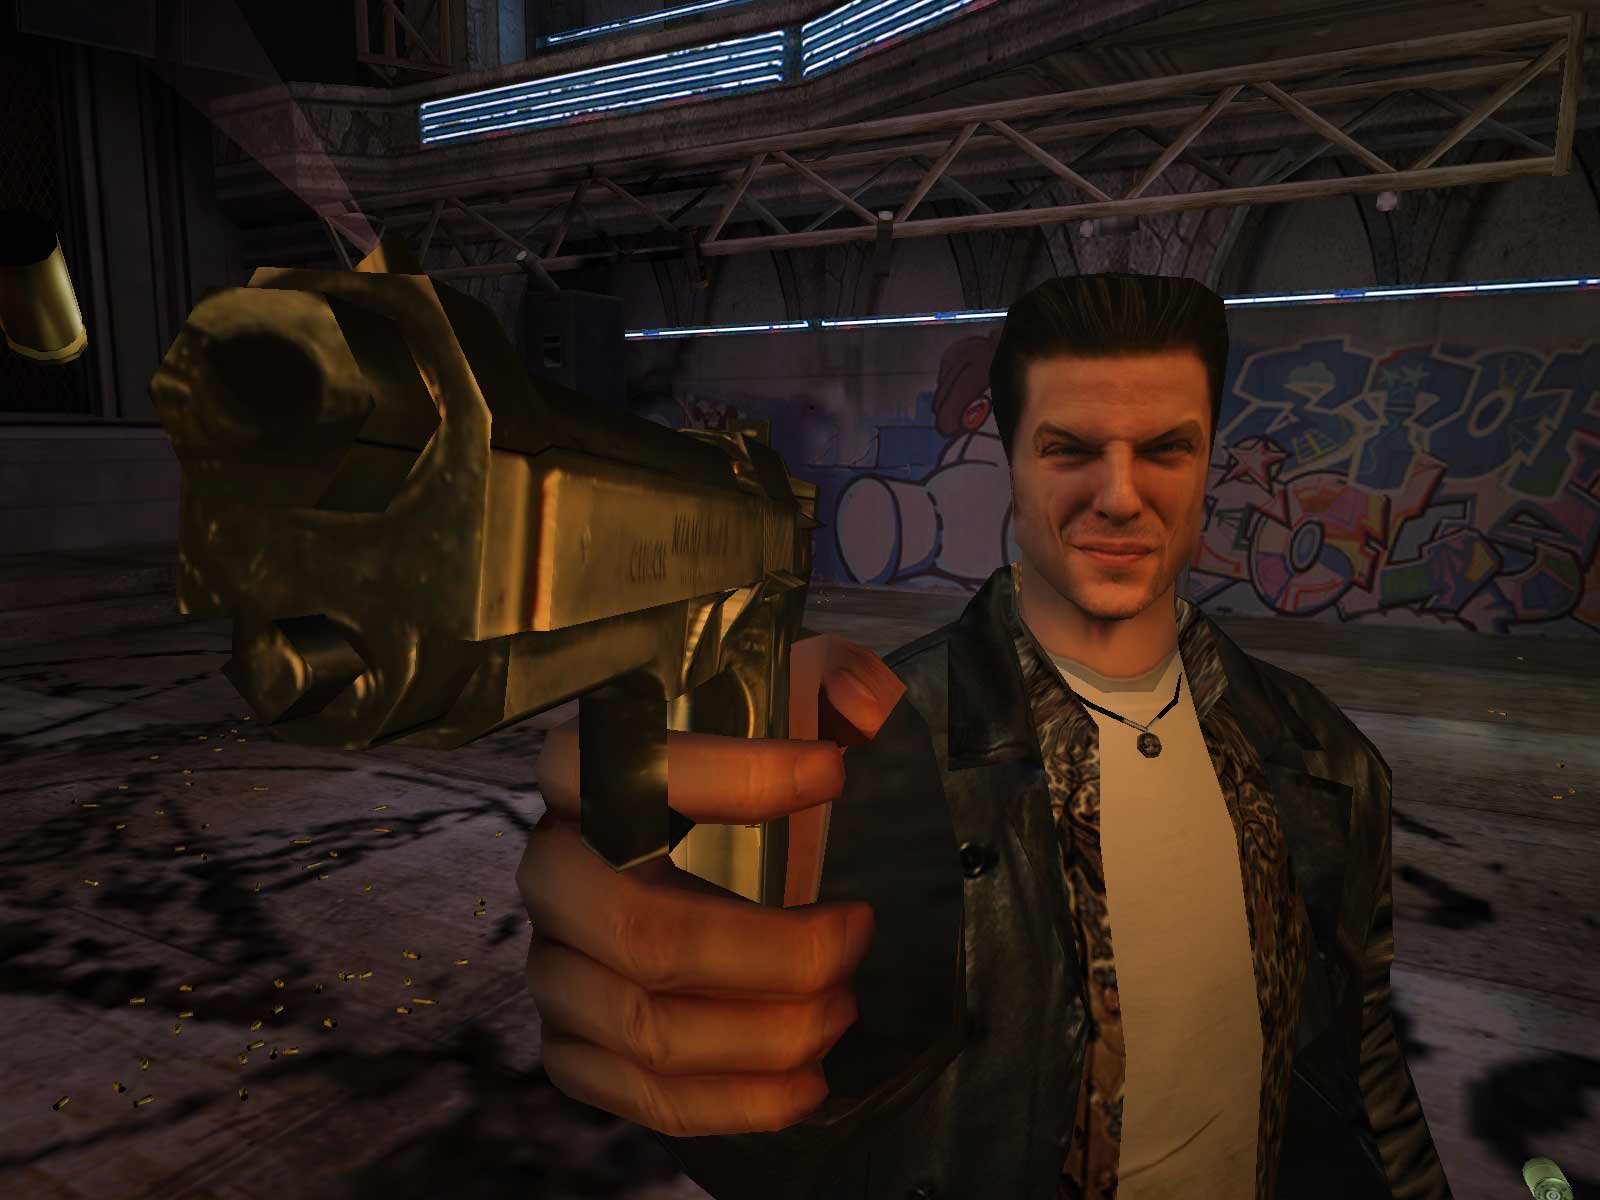 Max Payne, the game that has put Remedy on the map. Writer Sam Lake's face was actually mapped to the game character.